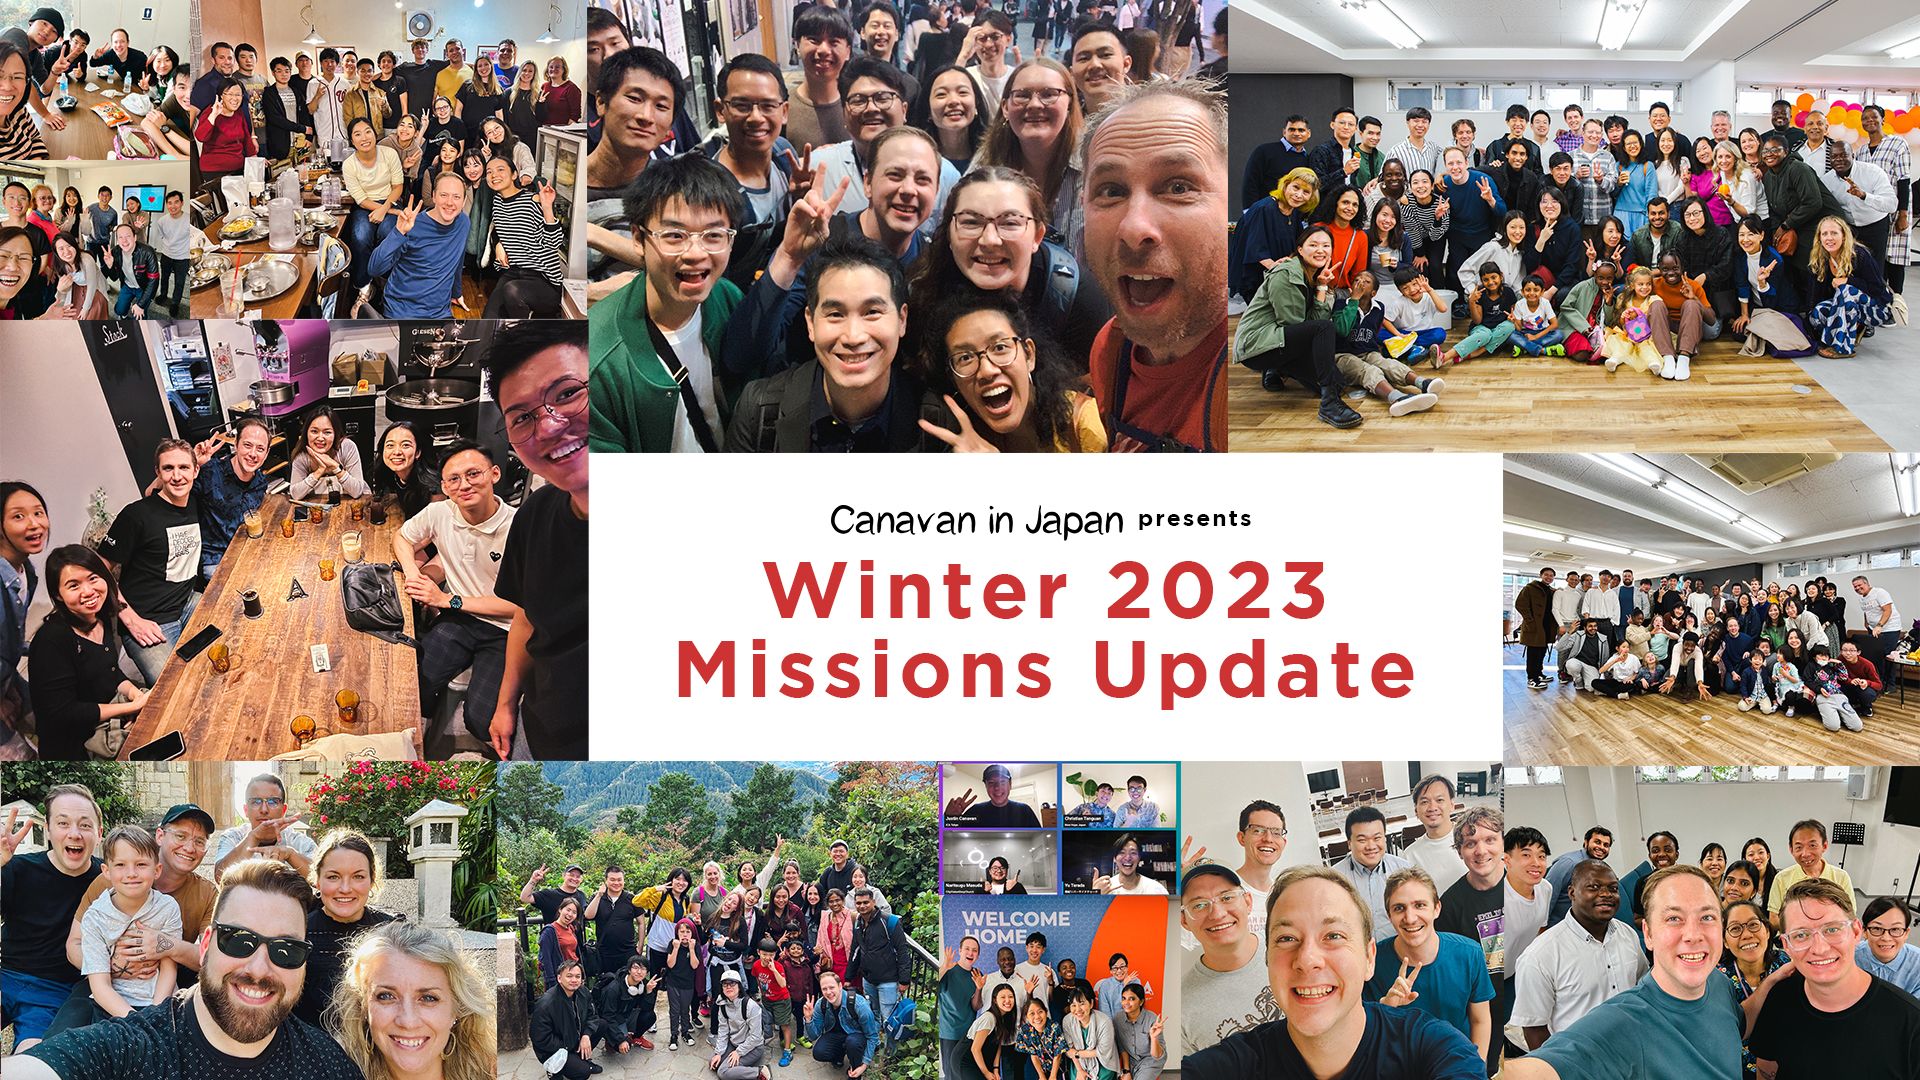 Winter 2023 Missions Update